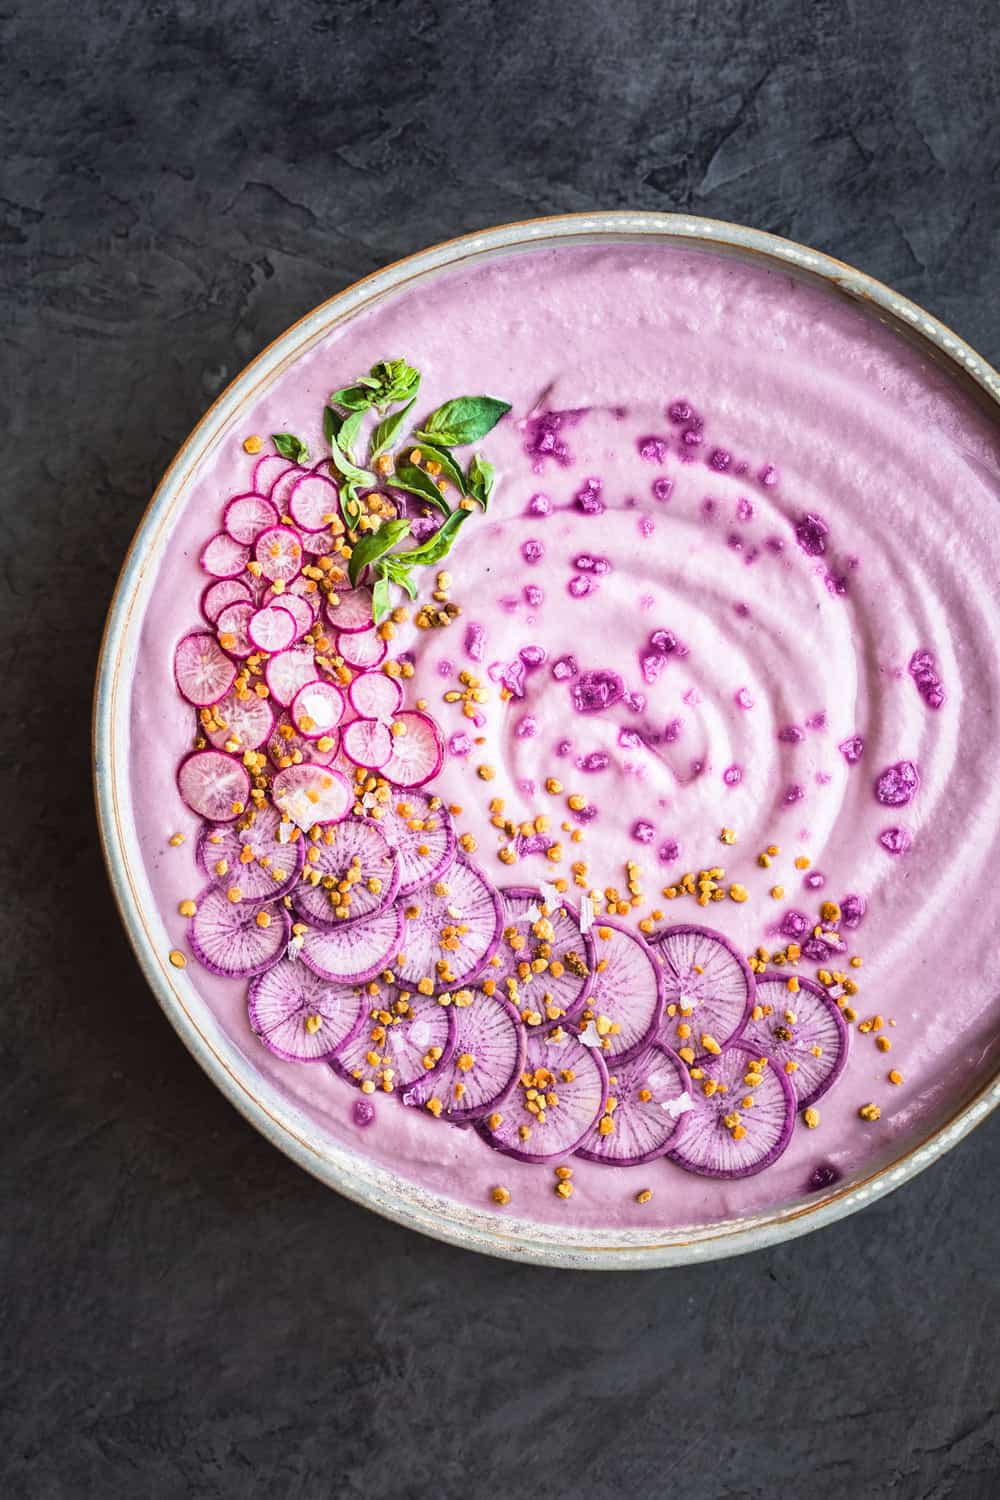 Vegan Purple Cauliflower Soup with Sliced Purple and Pink Radishes, tiny basil leaves, Bee Pollen and Flaky Sea Salt. Overhead shot, right side of bowl is cut off, on a dark grey background.